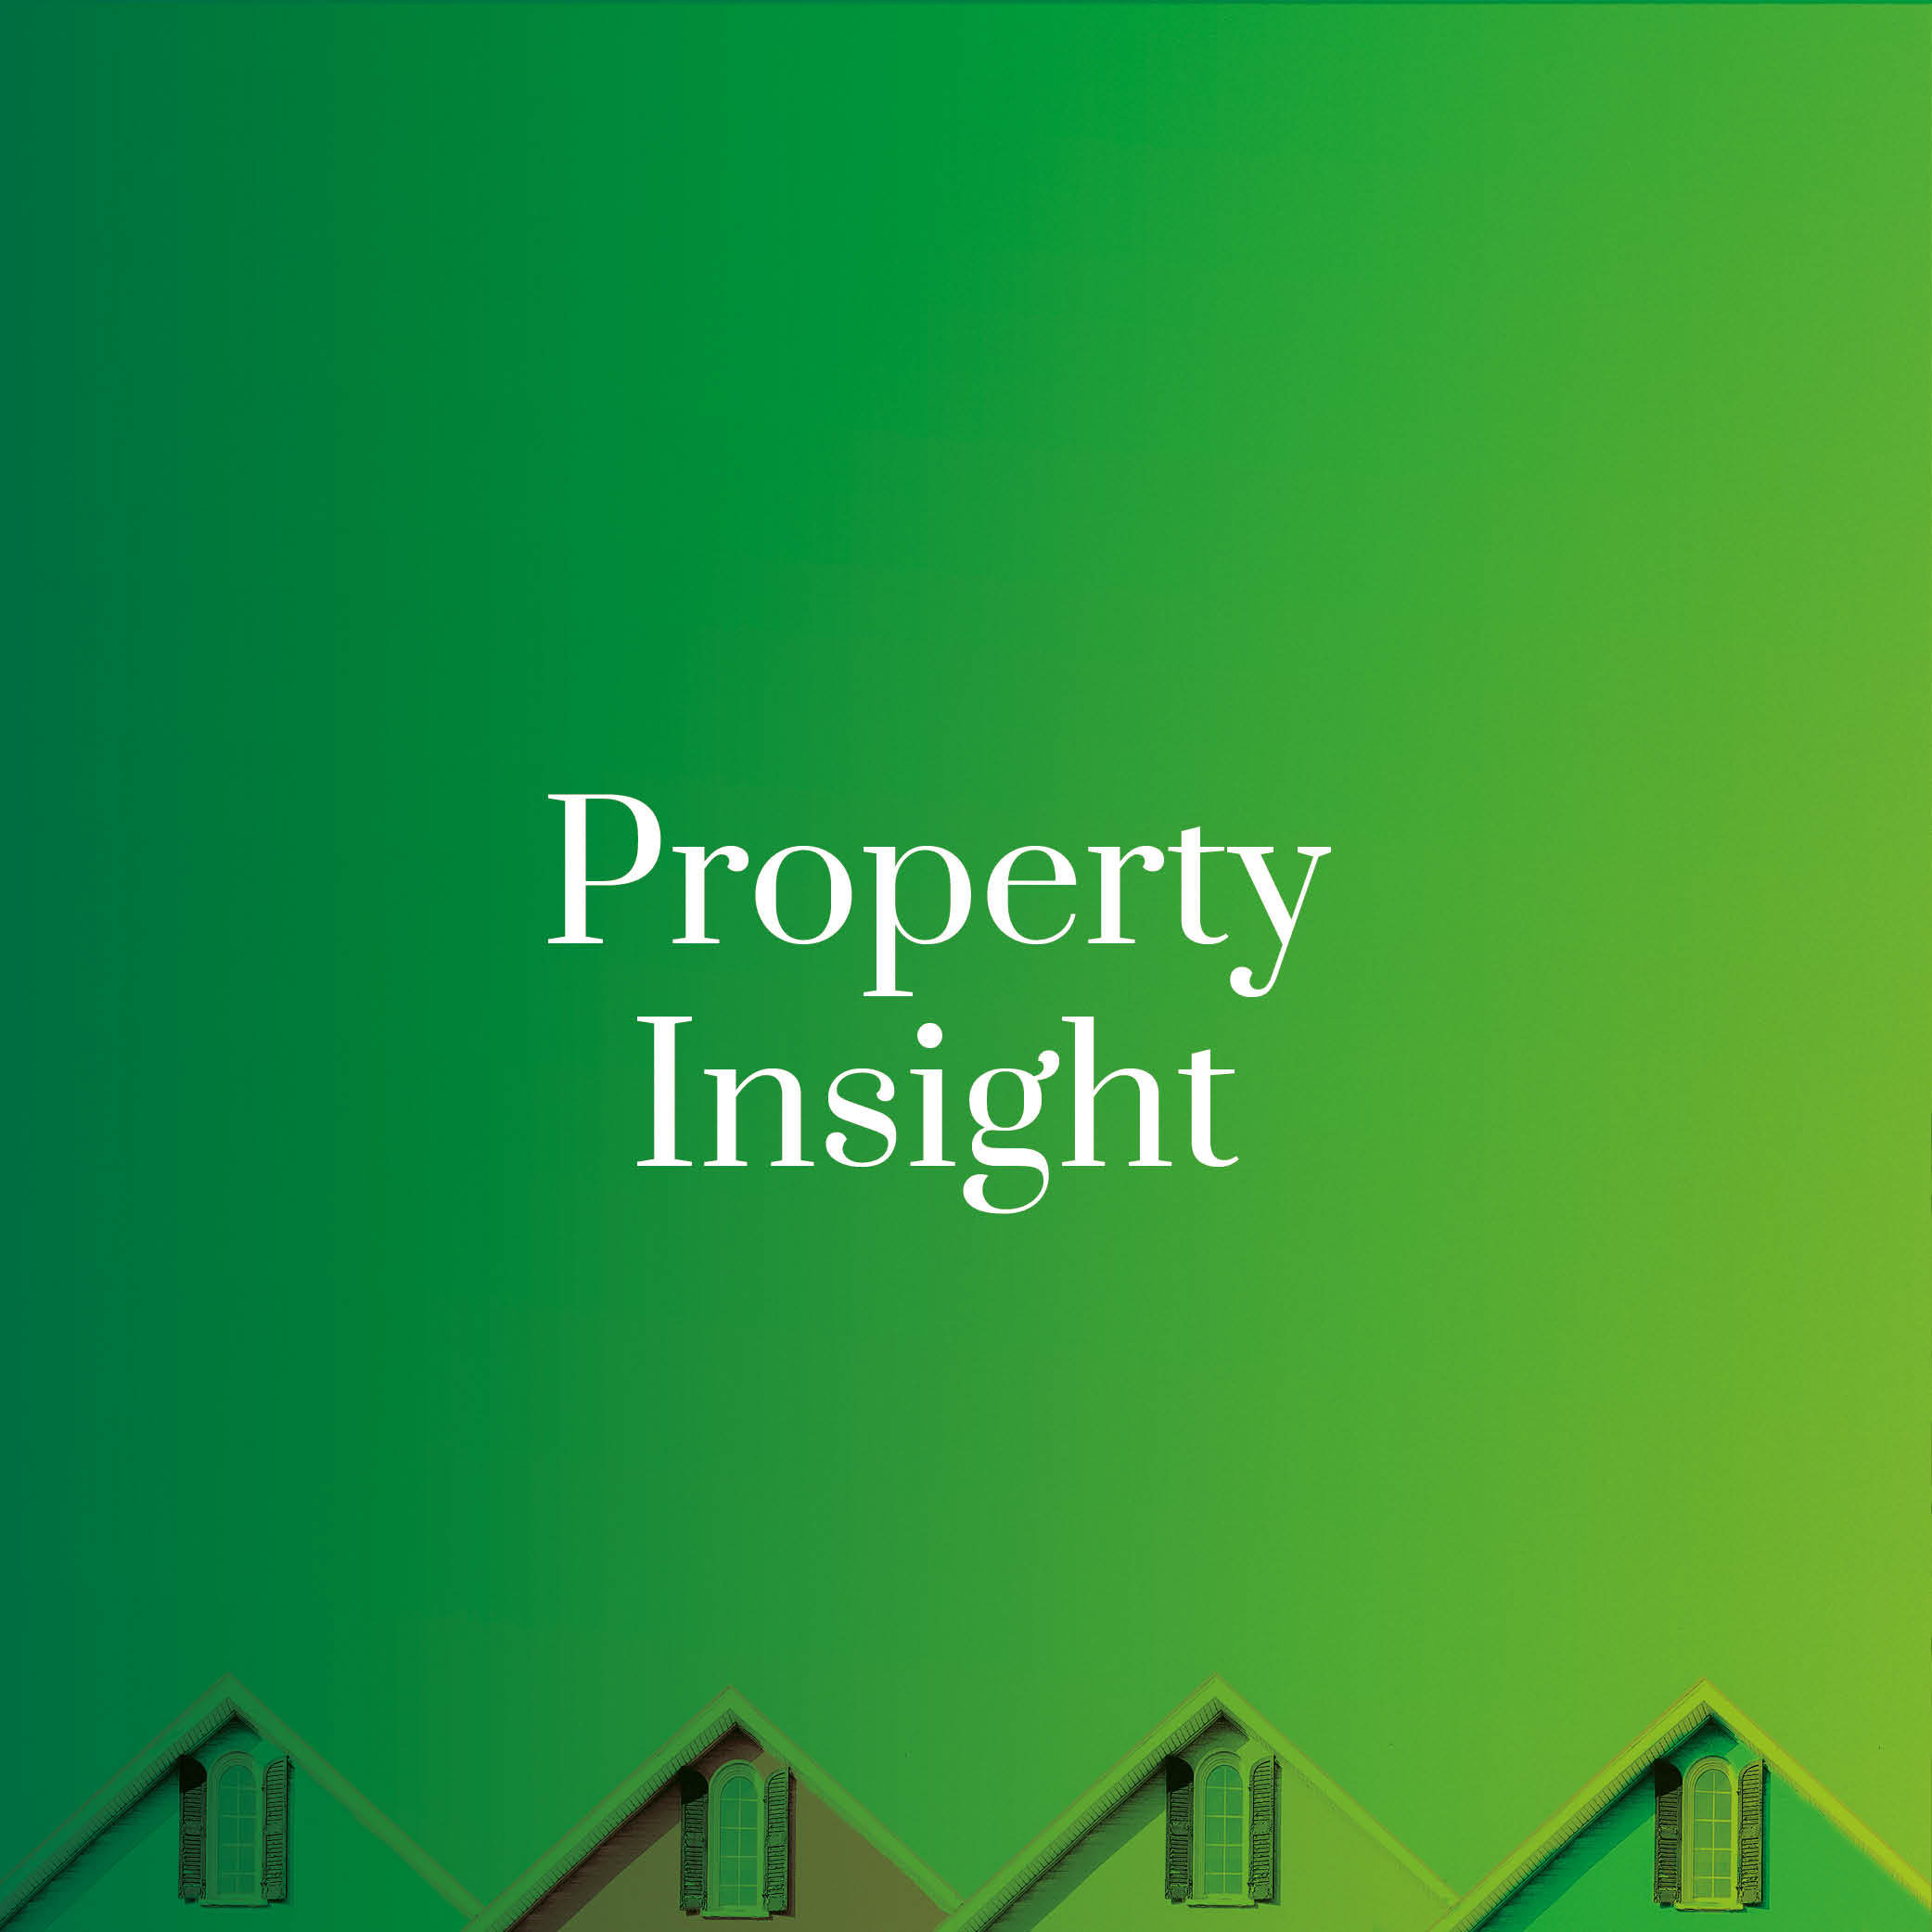 Property Insight houses image